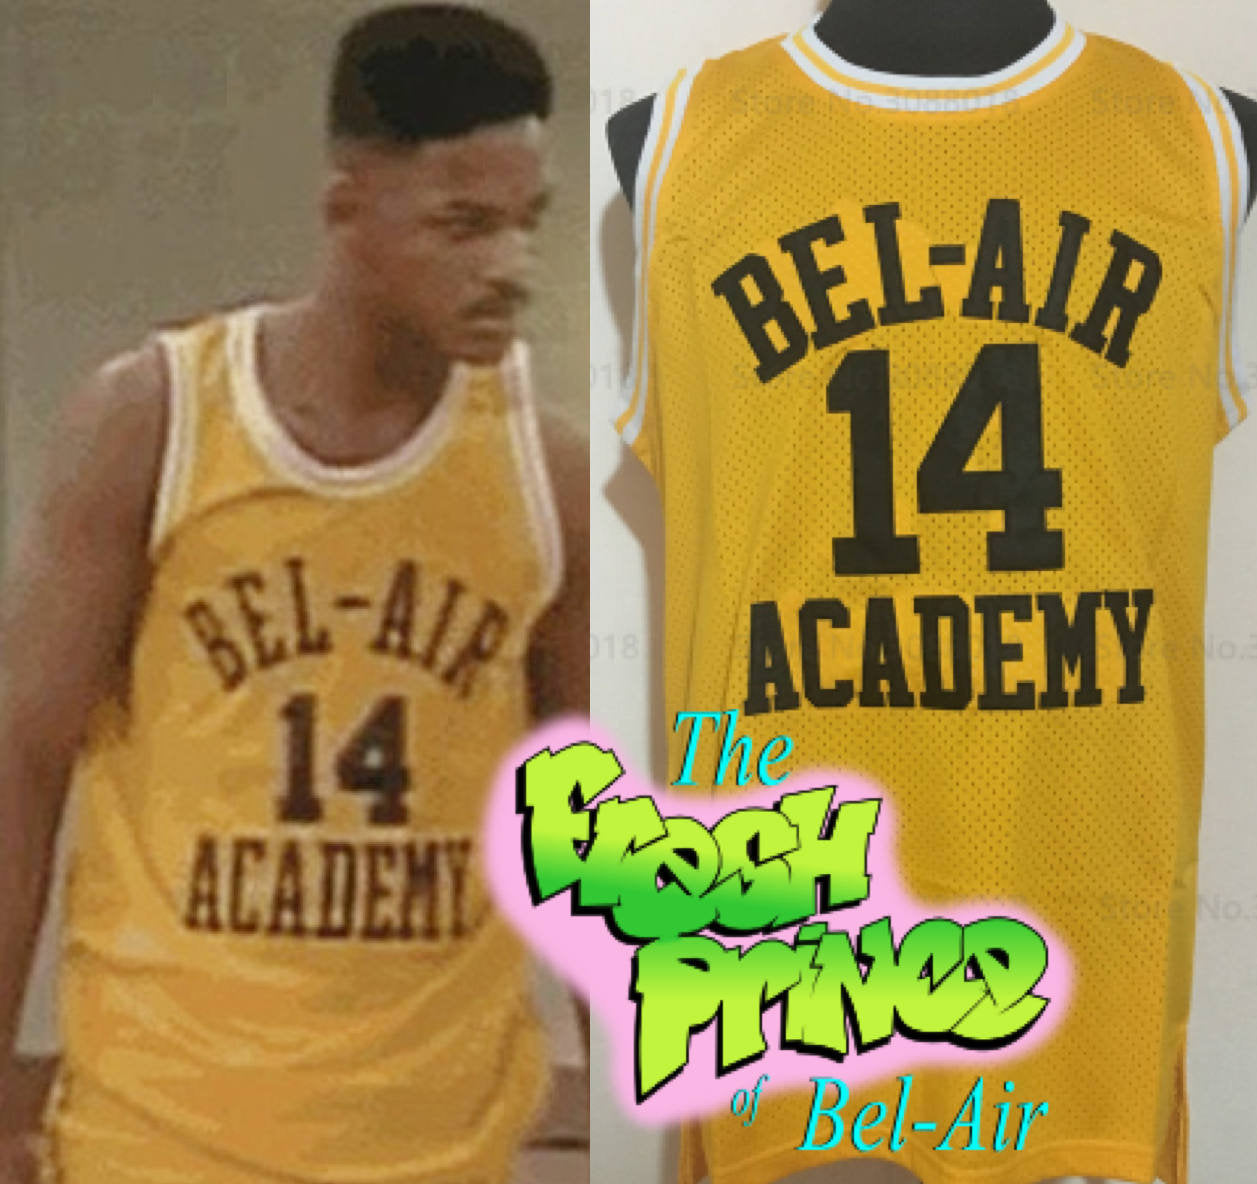  TIMBOW 14 The Fresh Prince of Bel Air Academy Mens Basketball  Jersey Shirts 90s Hip Hop Clothes for Party Black Yellow Embroidered :  Sports & Outdoors